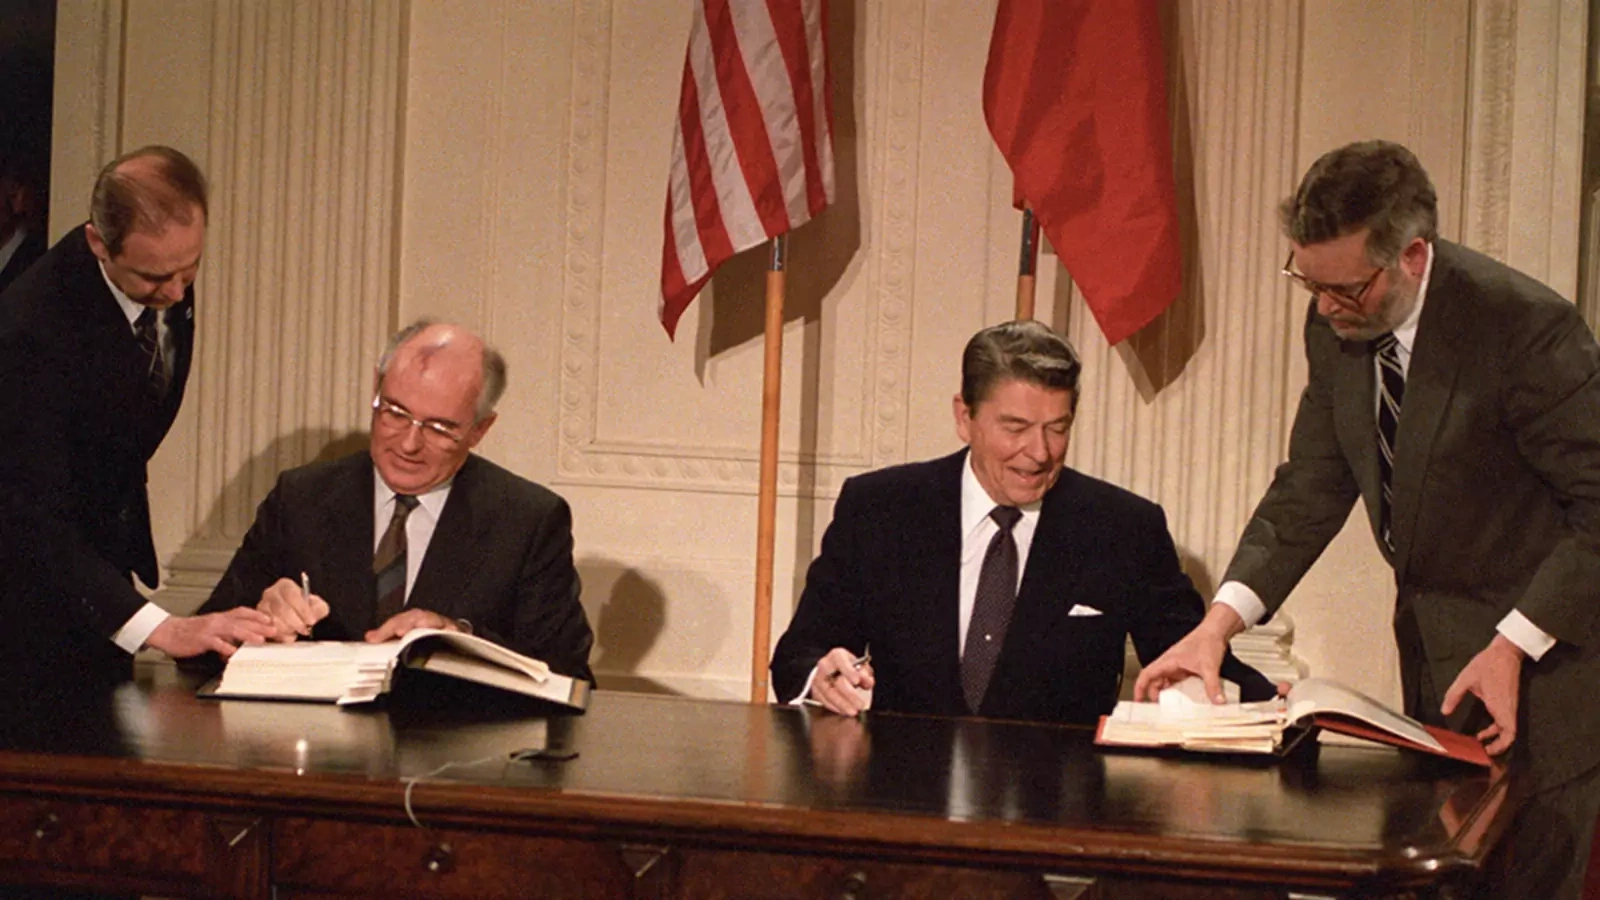 At their 1987 summit in Washington, President Ronald Reagan and Soviet leader Mikhail Gorbachev sign the Intermediate-Range Nuclear Forces treaty, a landmark arms control accord. 